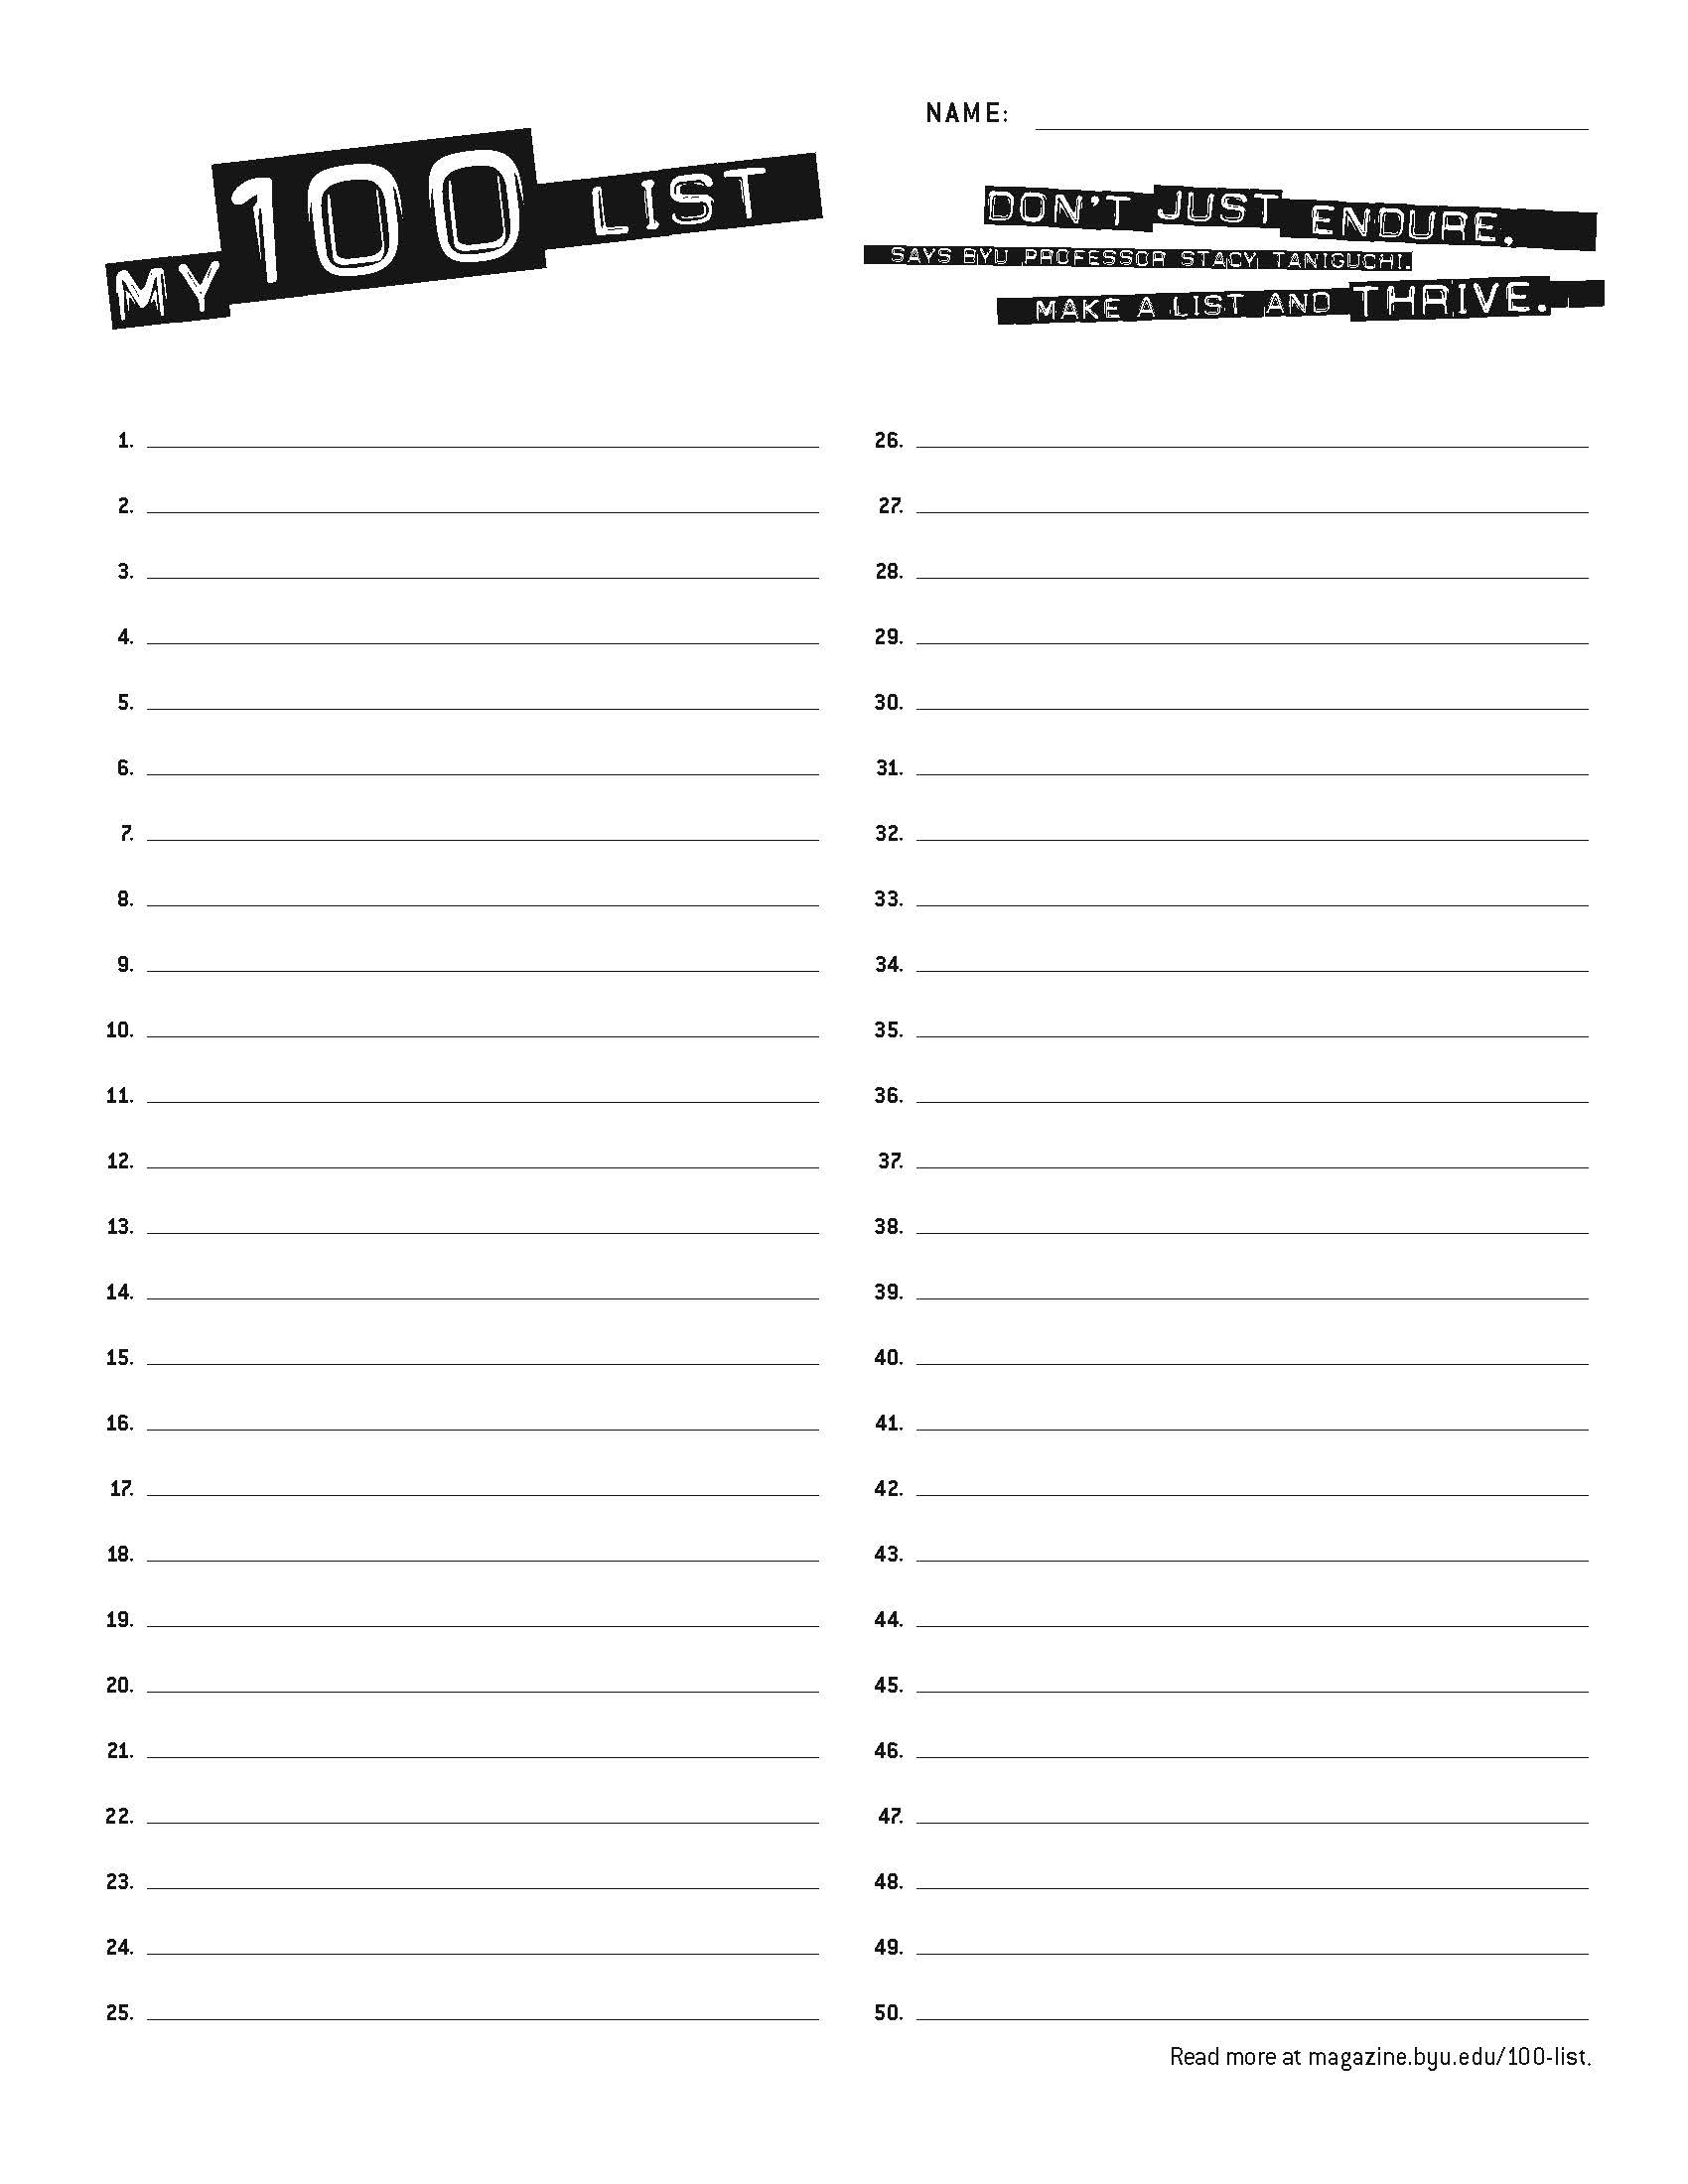 This 100-list form ready to fill out, numbered to 100. Readers can download and print it to begin a 100 list of their own.